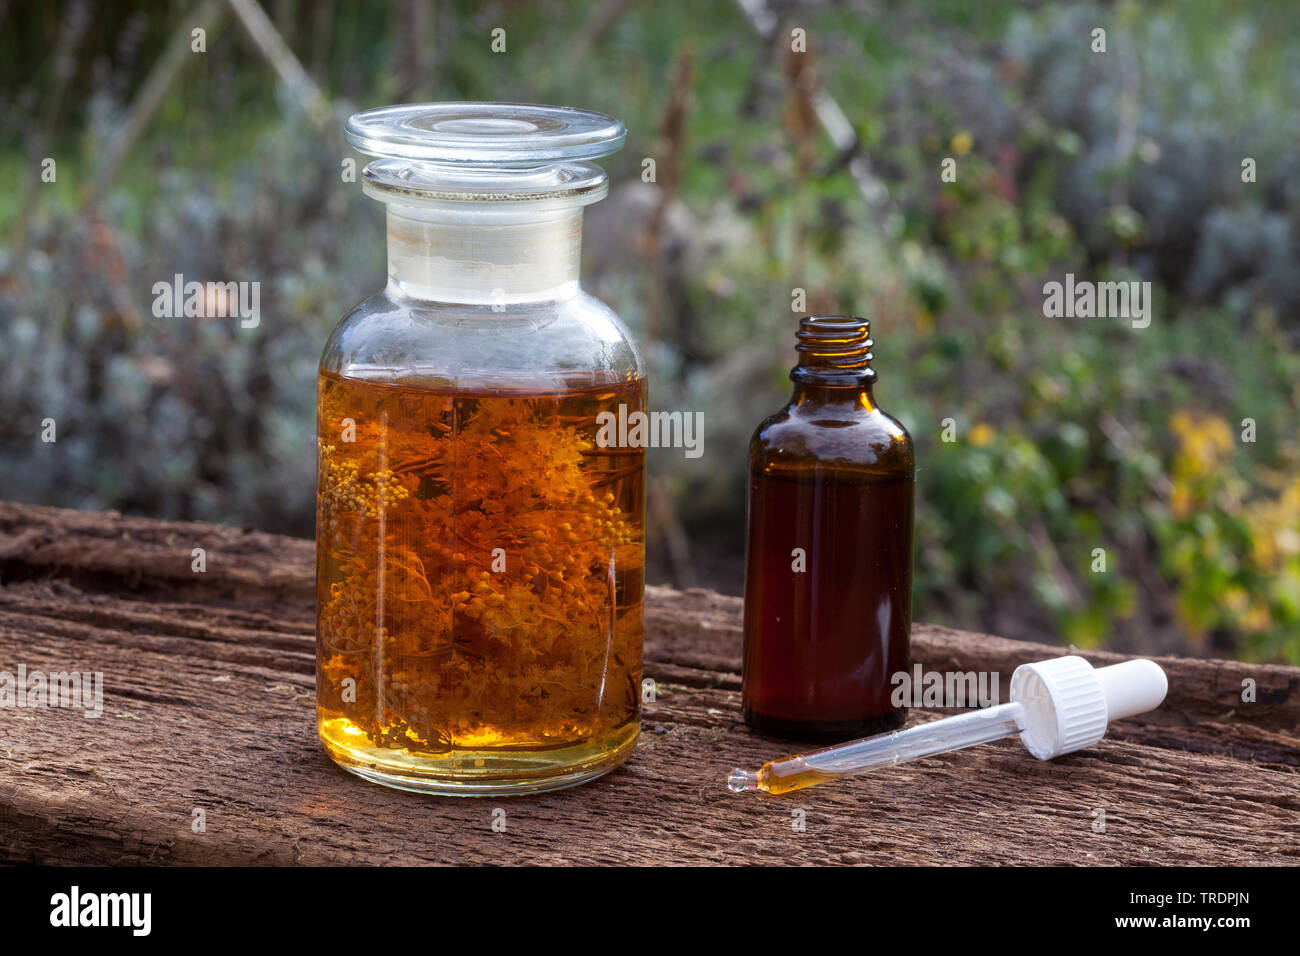 meadowsweet, queen-of-the-meadow (Filipendula ulmaria), self made tincture in alcohol, Germany Stock Photo